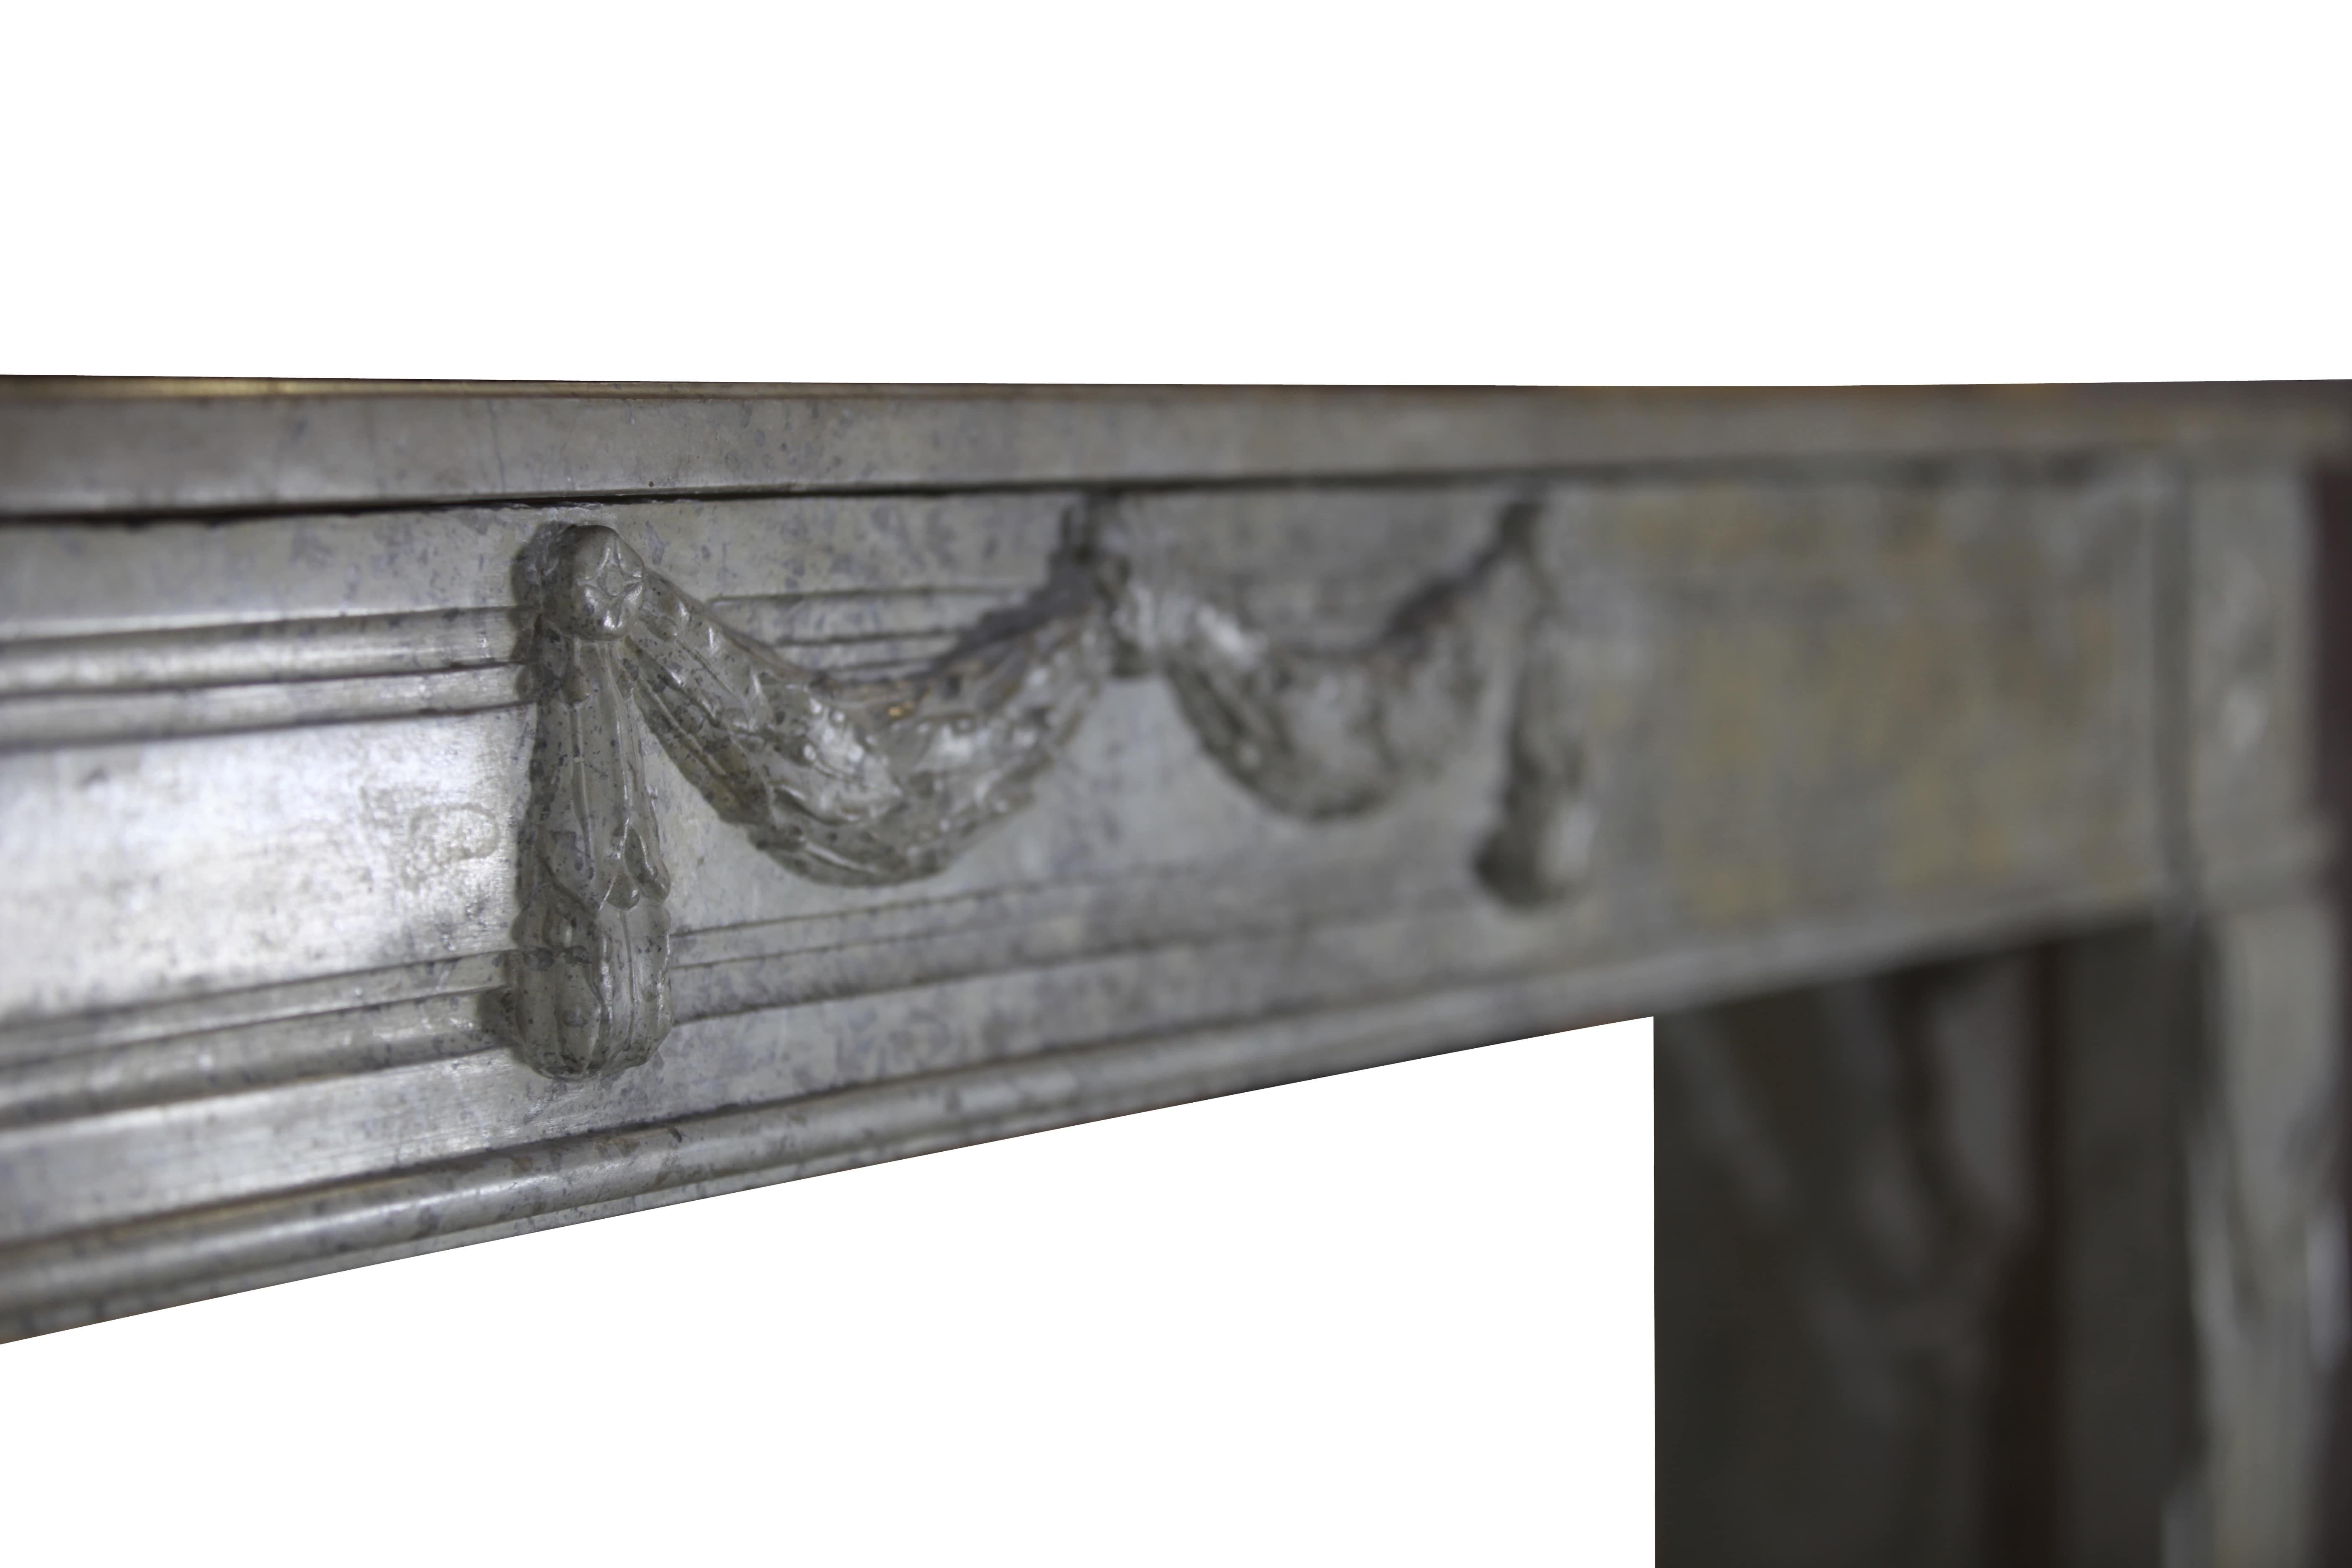 A fine antique 18th century marble antique fireplace surround of the Directoire period. It was installed in a corner. See the marks on the shelf. This Classic stylish mantelpiece was build in the late 18th century.
Measures:
167 cm exterior width